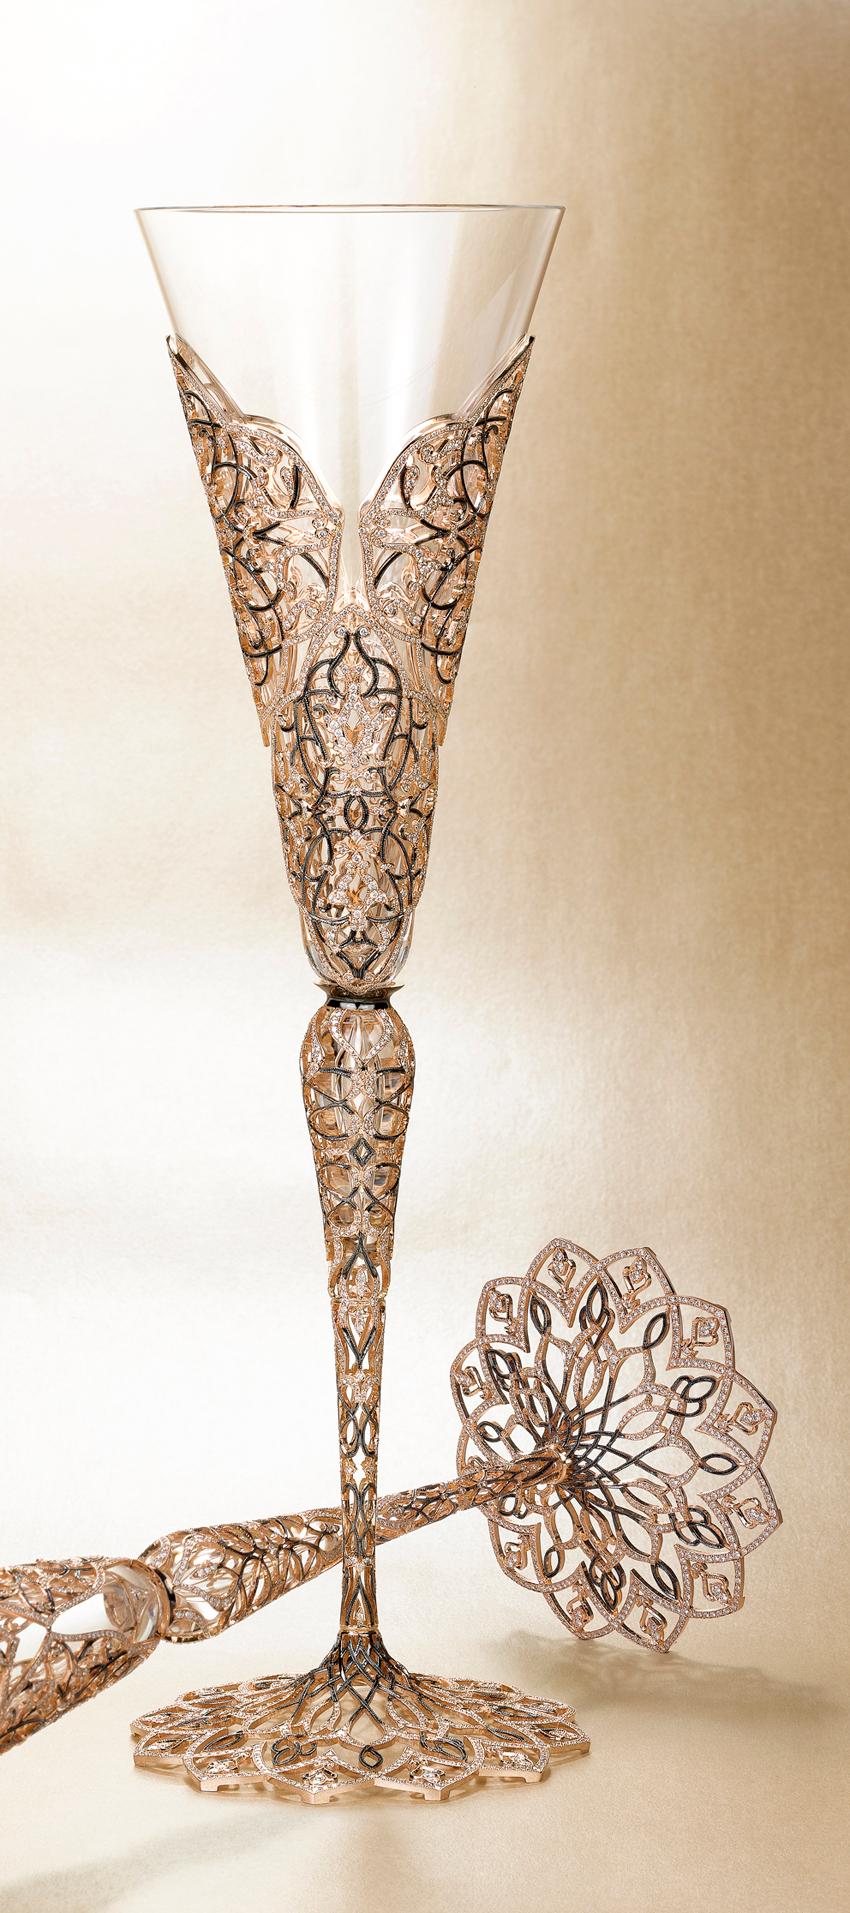 18kt rose gold champagne glass is set with 2506 brilliant diamonds totaling 18.28 carats